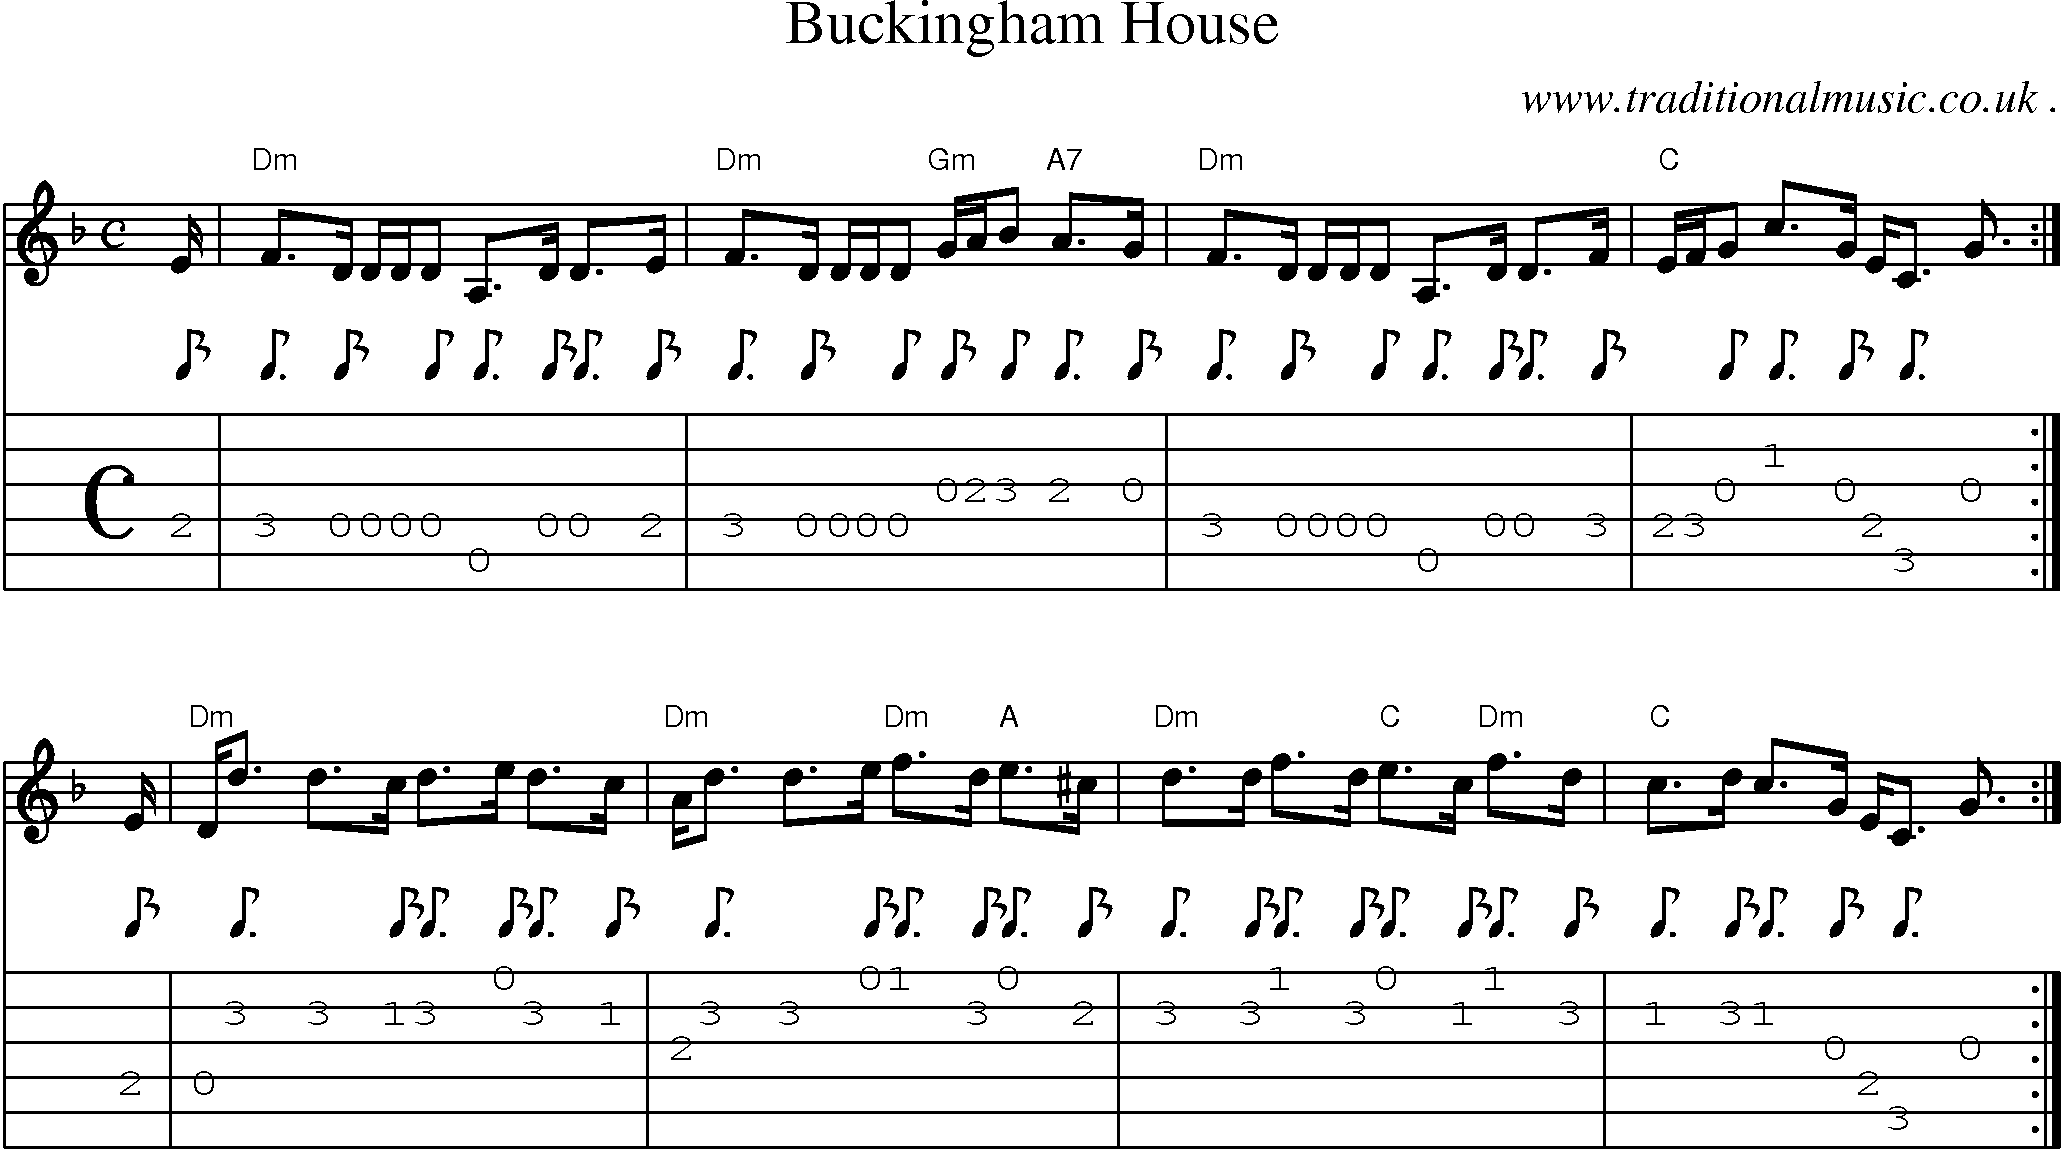 Sheet-music  score, Chords and Guitar Tabs for Buckingham House